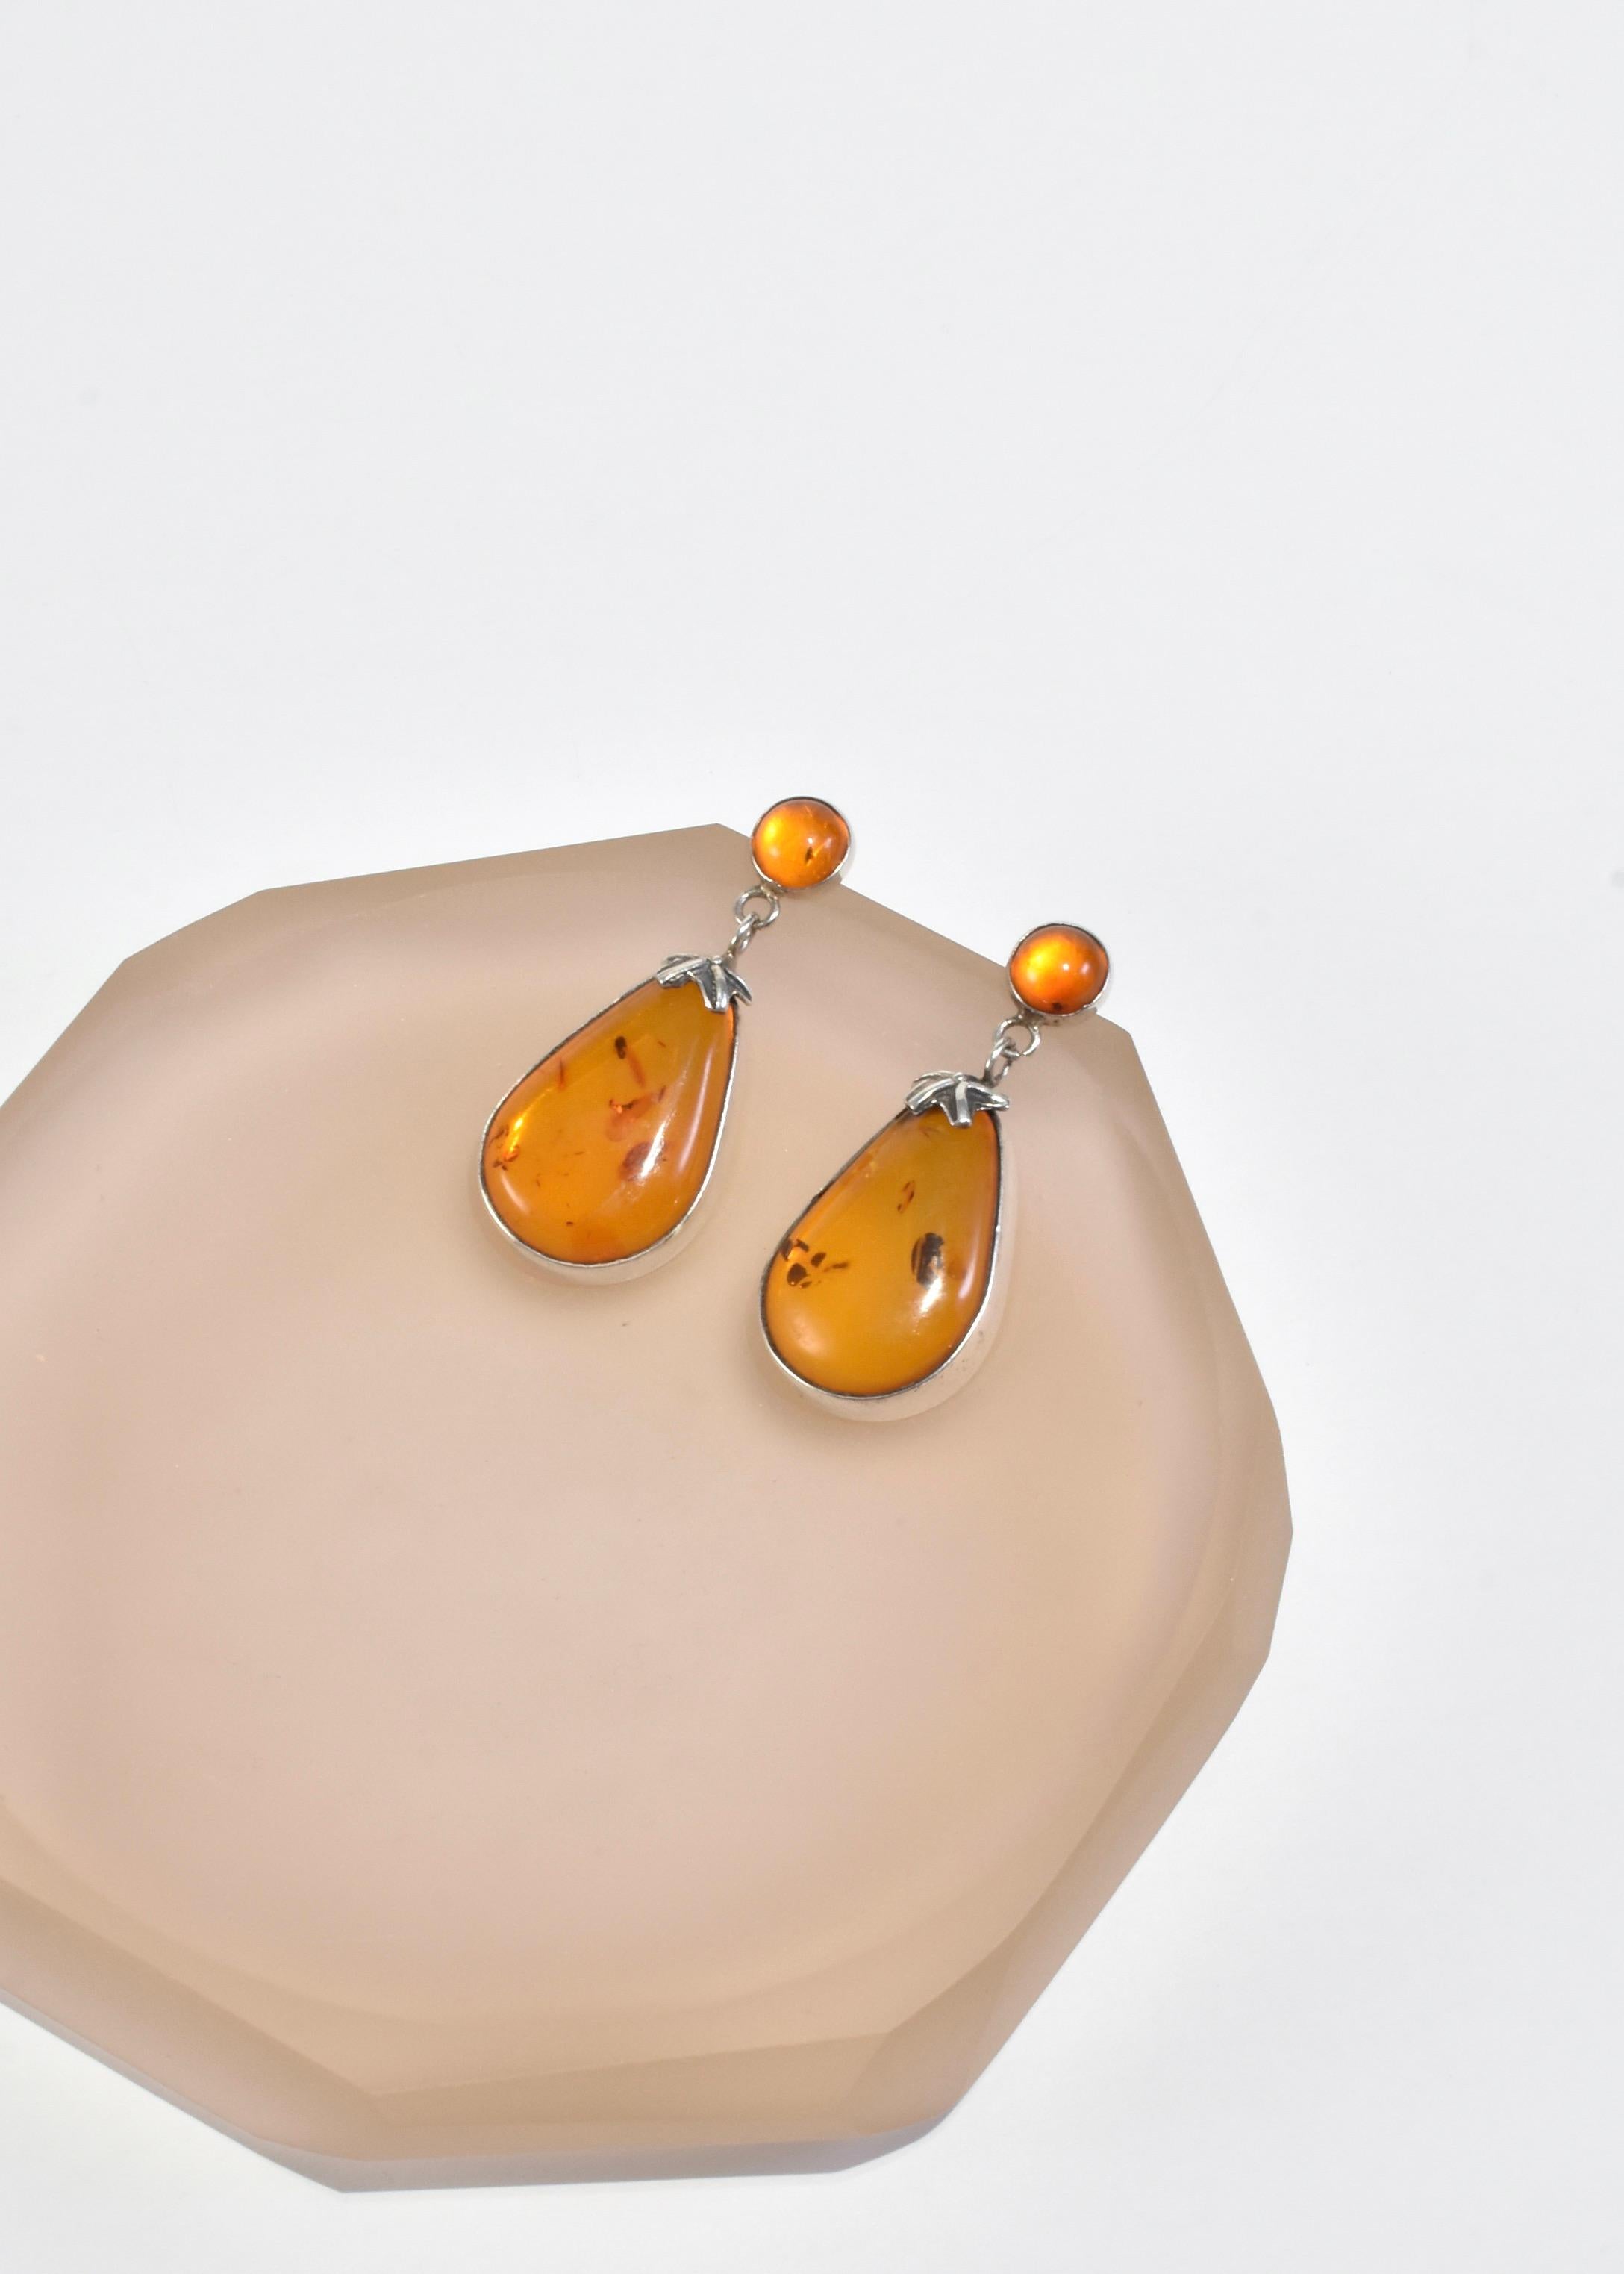 Stunning vintage silver earrings with beautiful polished baltic amber stones, pierced.

Material: Sterling silver, amber.